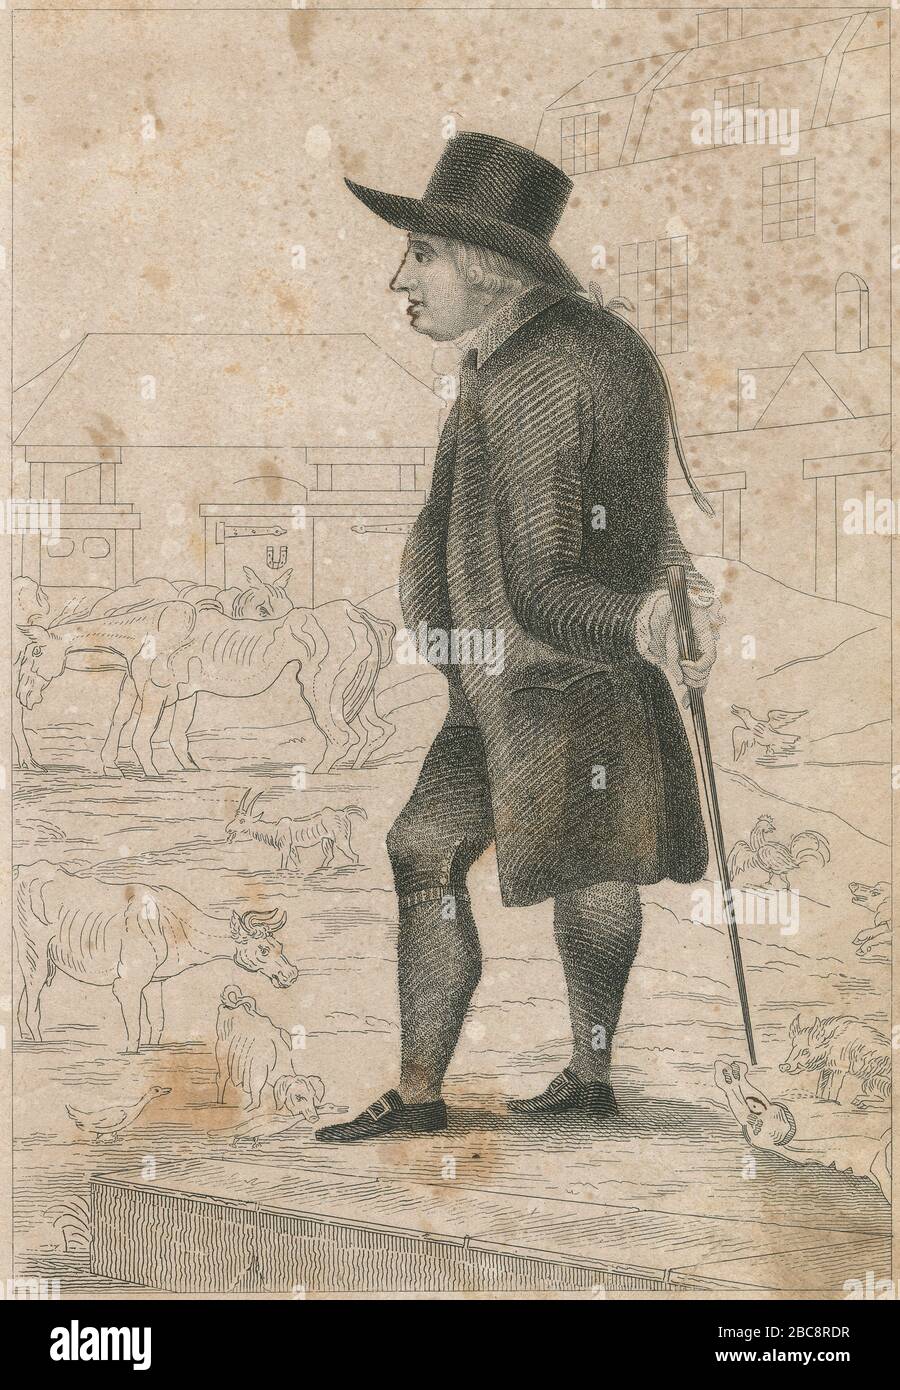 Antique engraving, “Baron d'Aguilar of Starvation Farm.” Ephraim Lópes Pereira d'Aguilar (1739-1802) was the second Baron d'Aguilar, a Barony of the Holy Roman Empire. His establishment at Colebrook Row, Islington, was popularly styled 'Starvation Farm', because of the scanty food provided for the cattle. SOURCE: ORIGINAL ENGRAVING Stock Photo